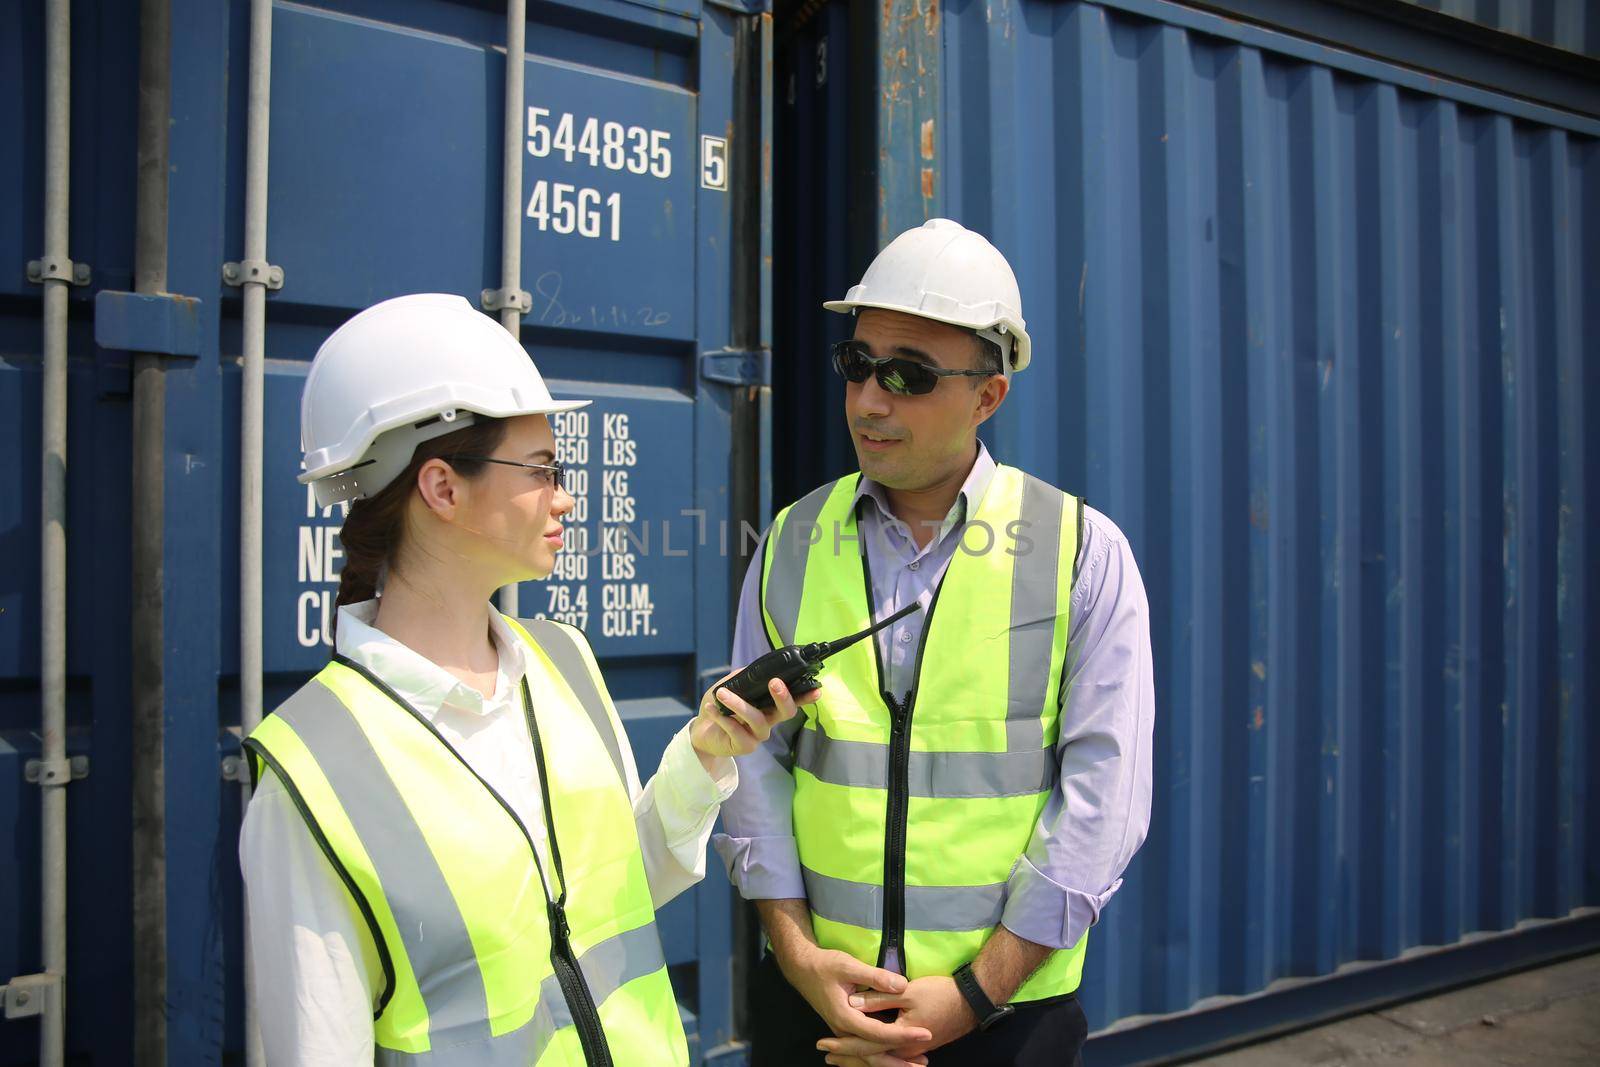 Logistics engineer control at the port, loading containers for trucks export and importing logistic concept